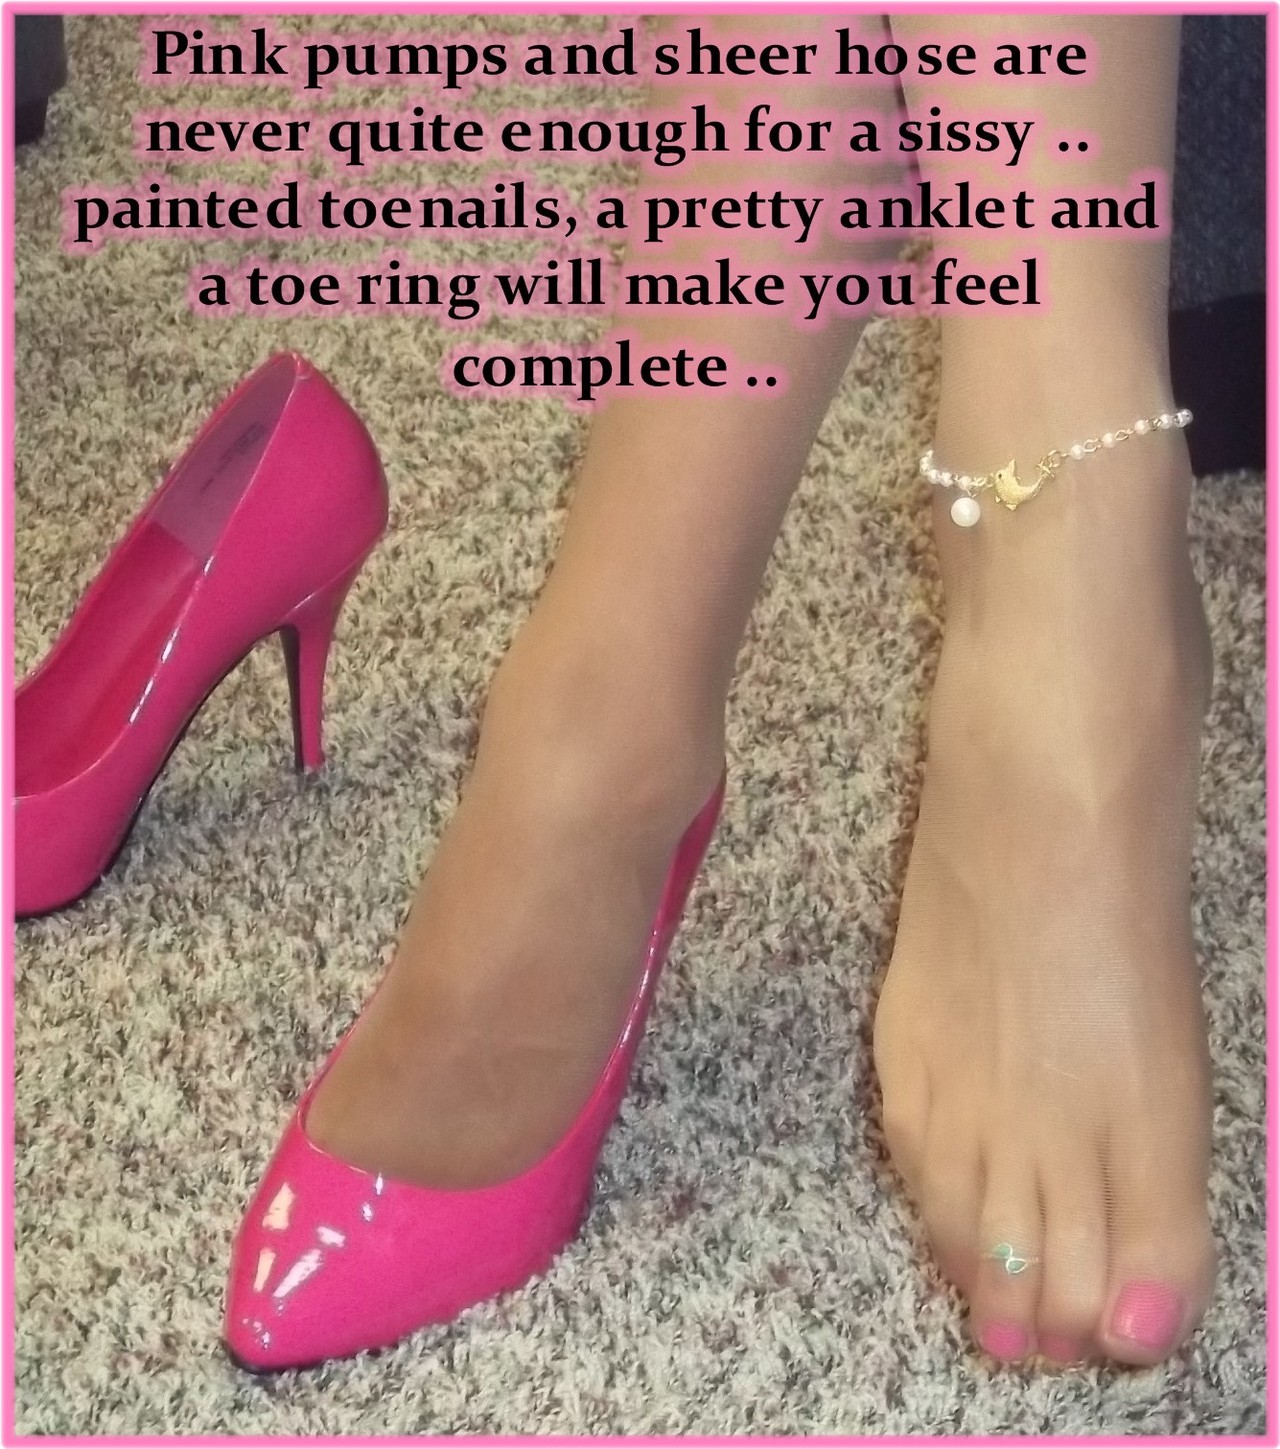 Small sissy details.